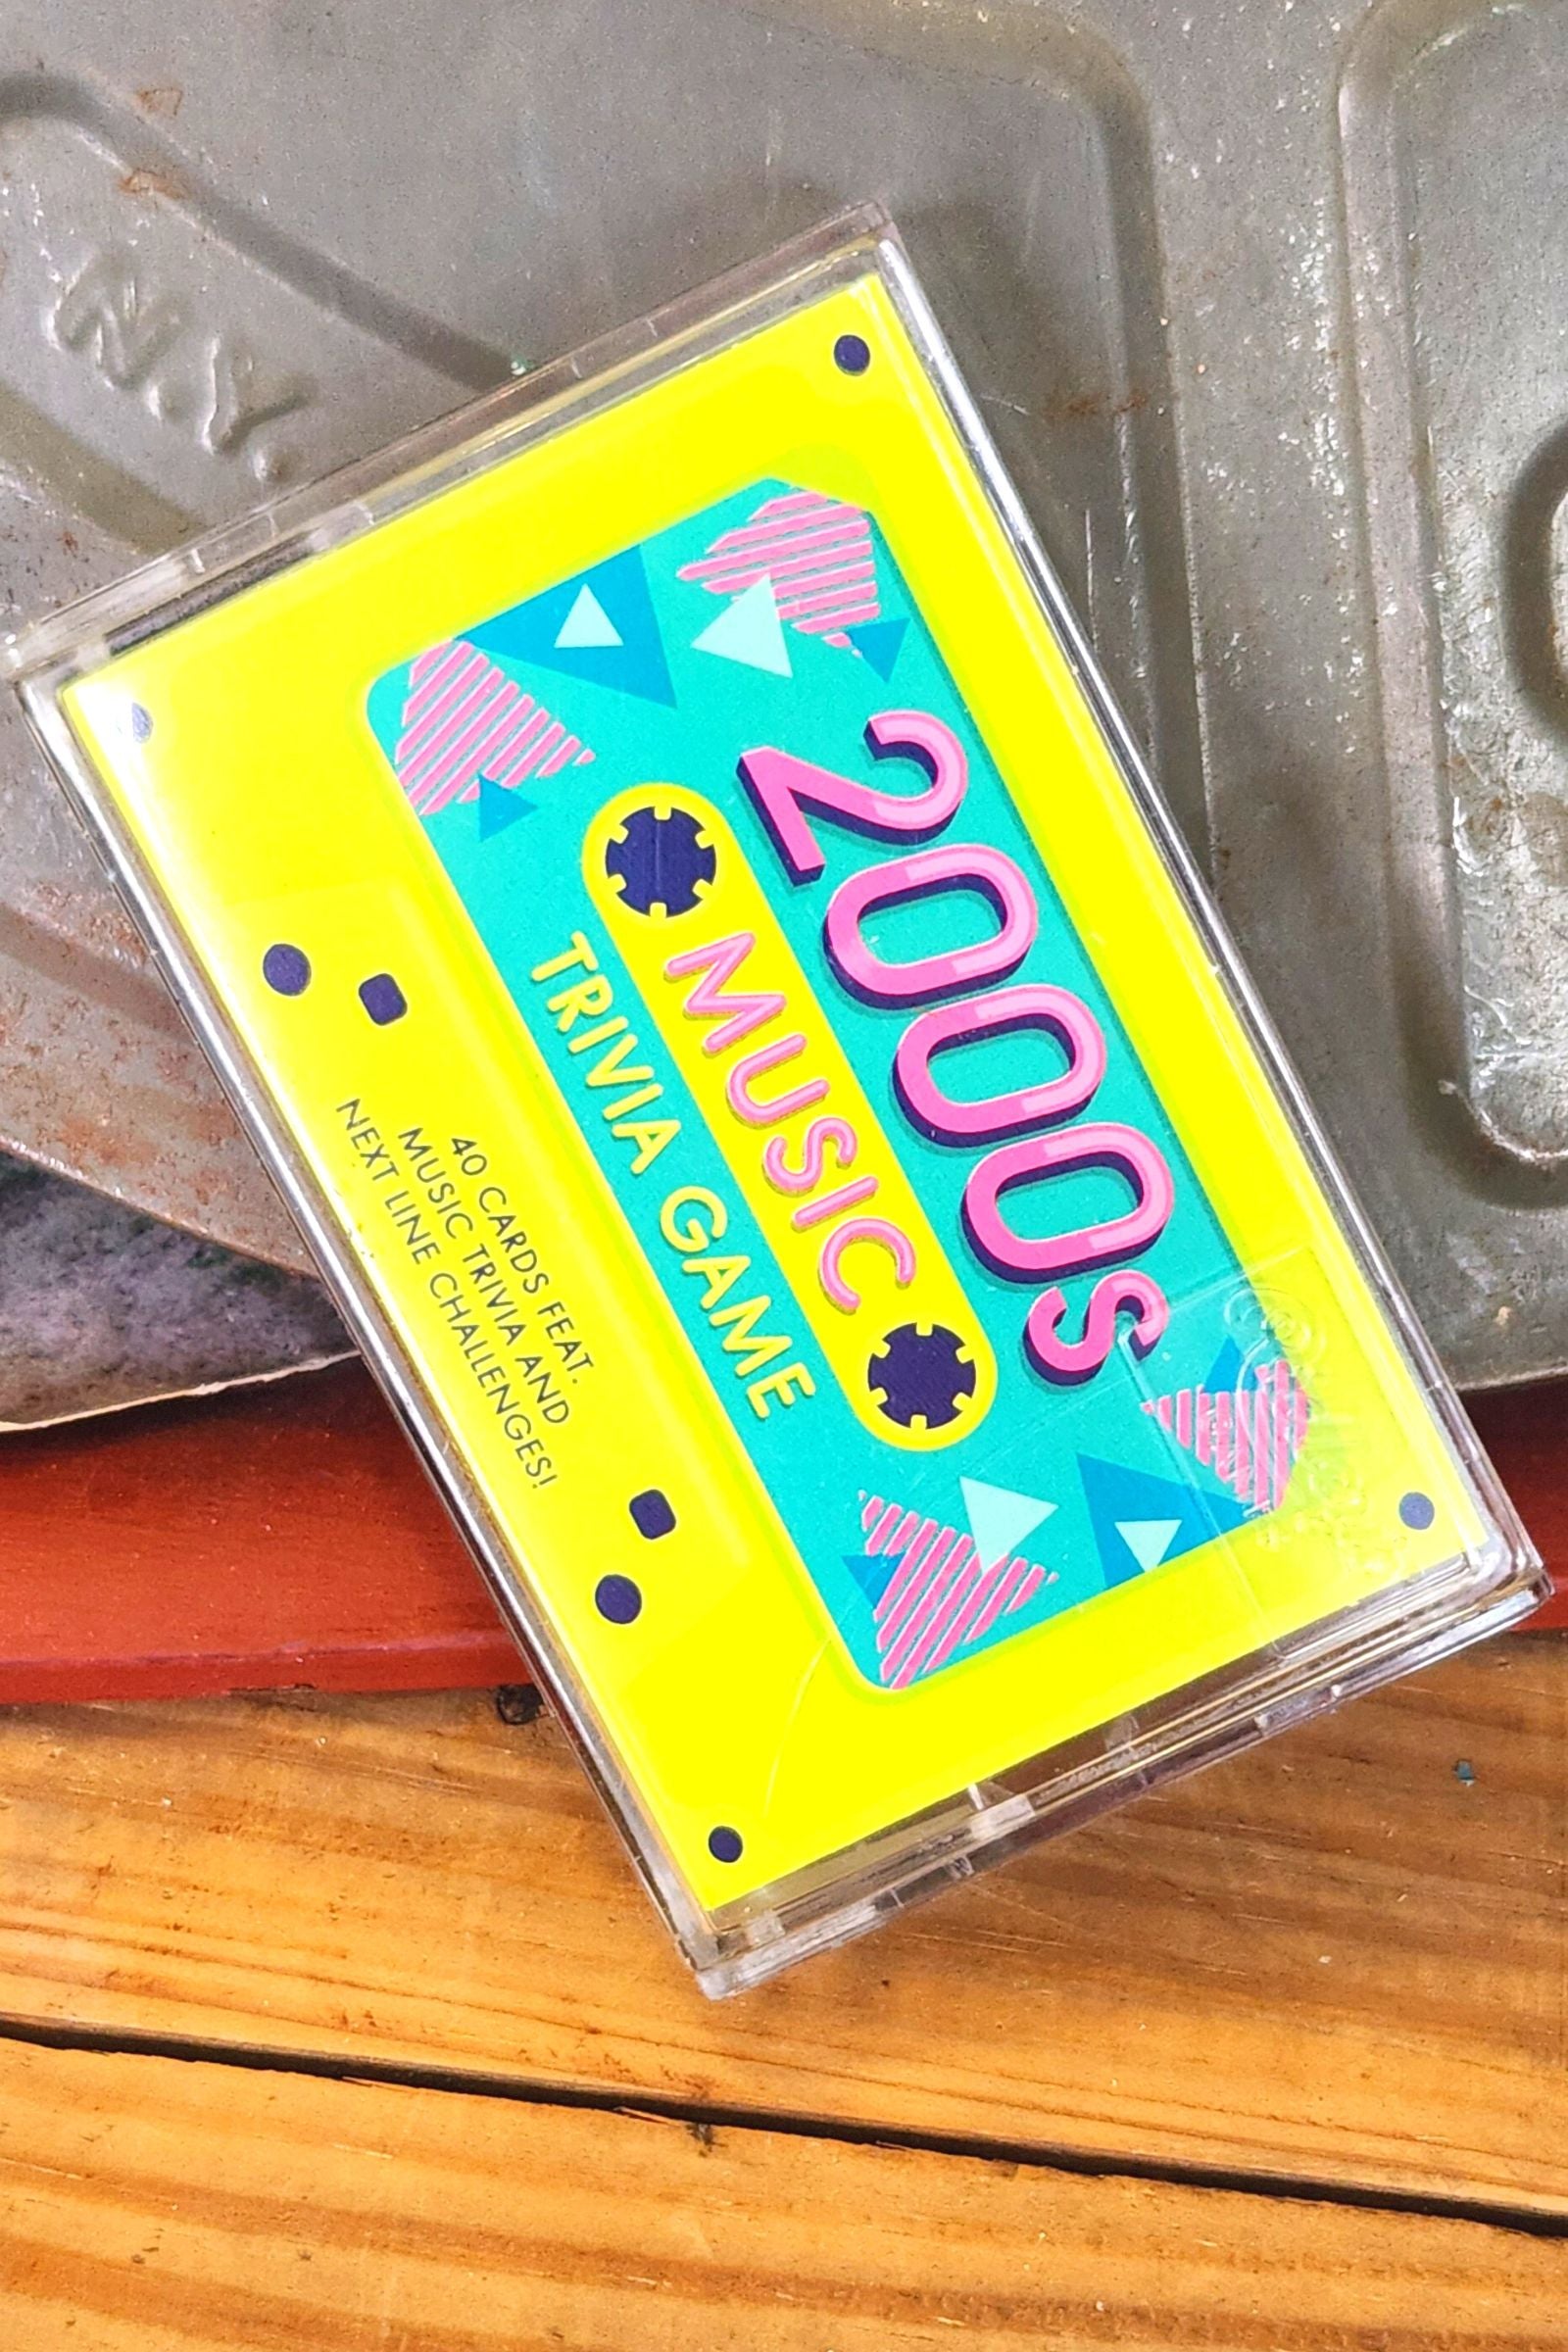 Trivia Tapes 2000's Music Trivia Game